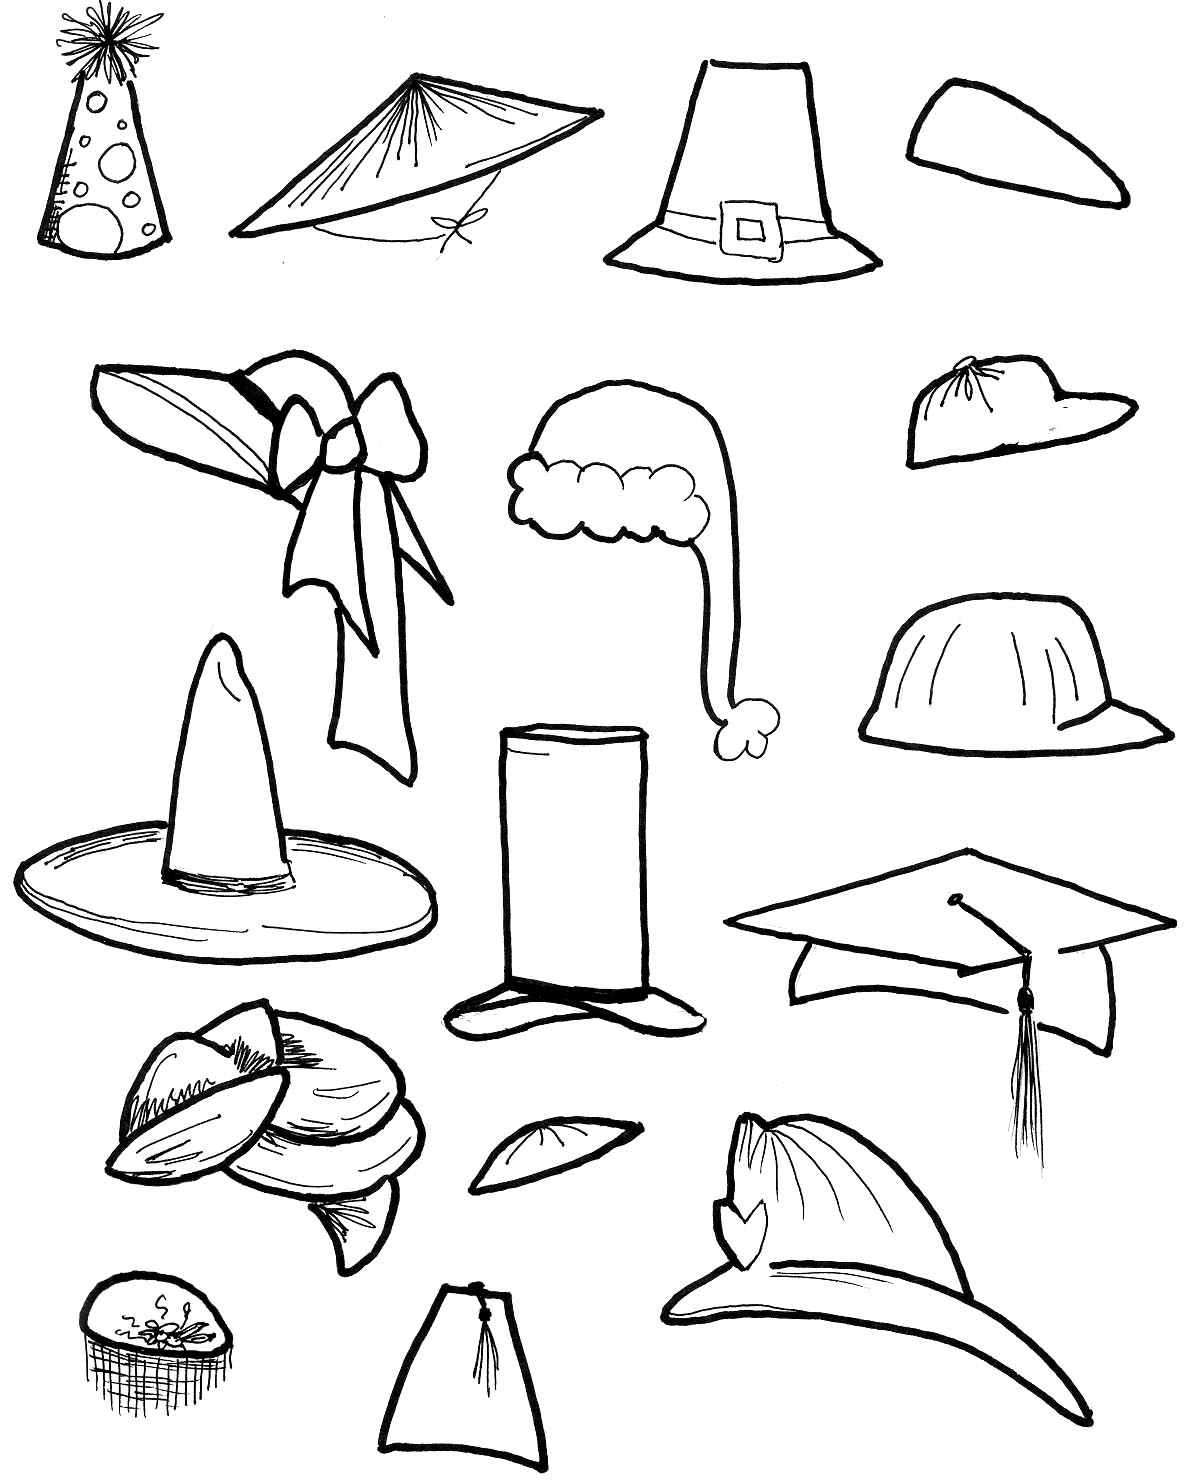 With Different Styles Of Hats And Give It To The Children To Color